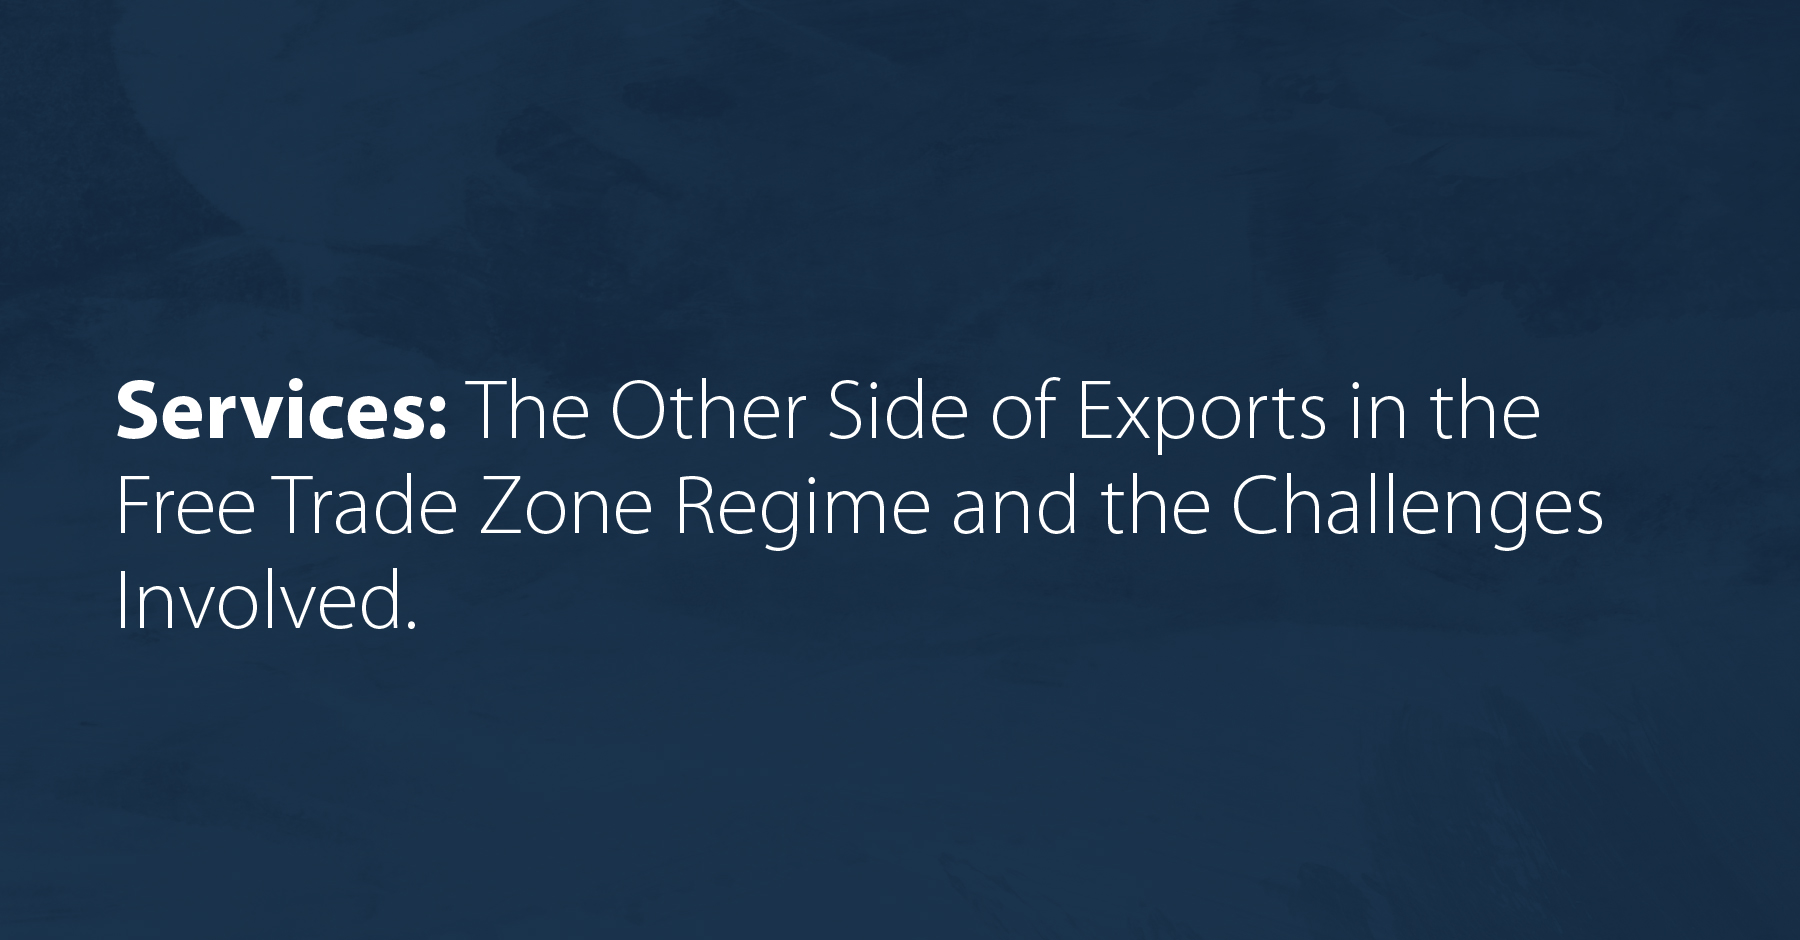 Services: The Other Side of Exports in the Free Trade Zone Regime and the Challenges Involved